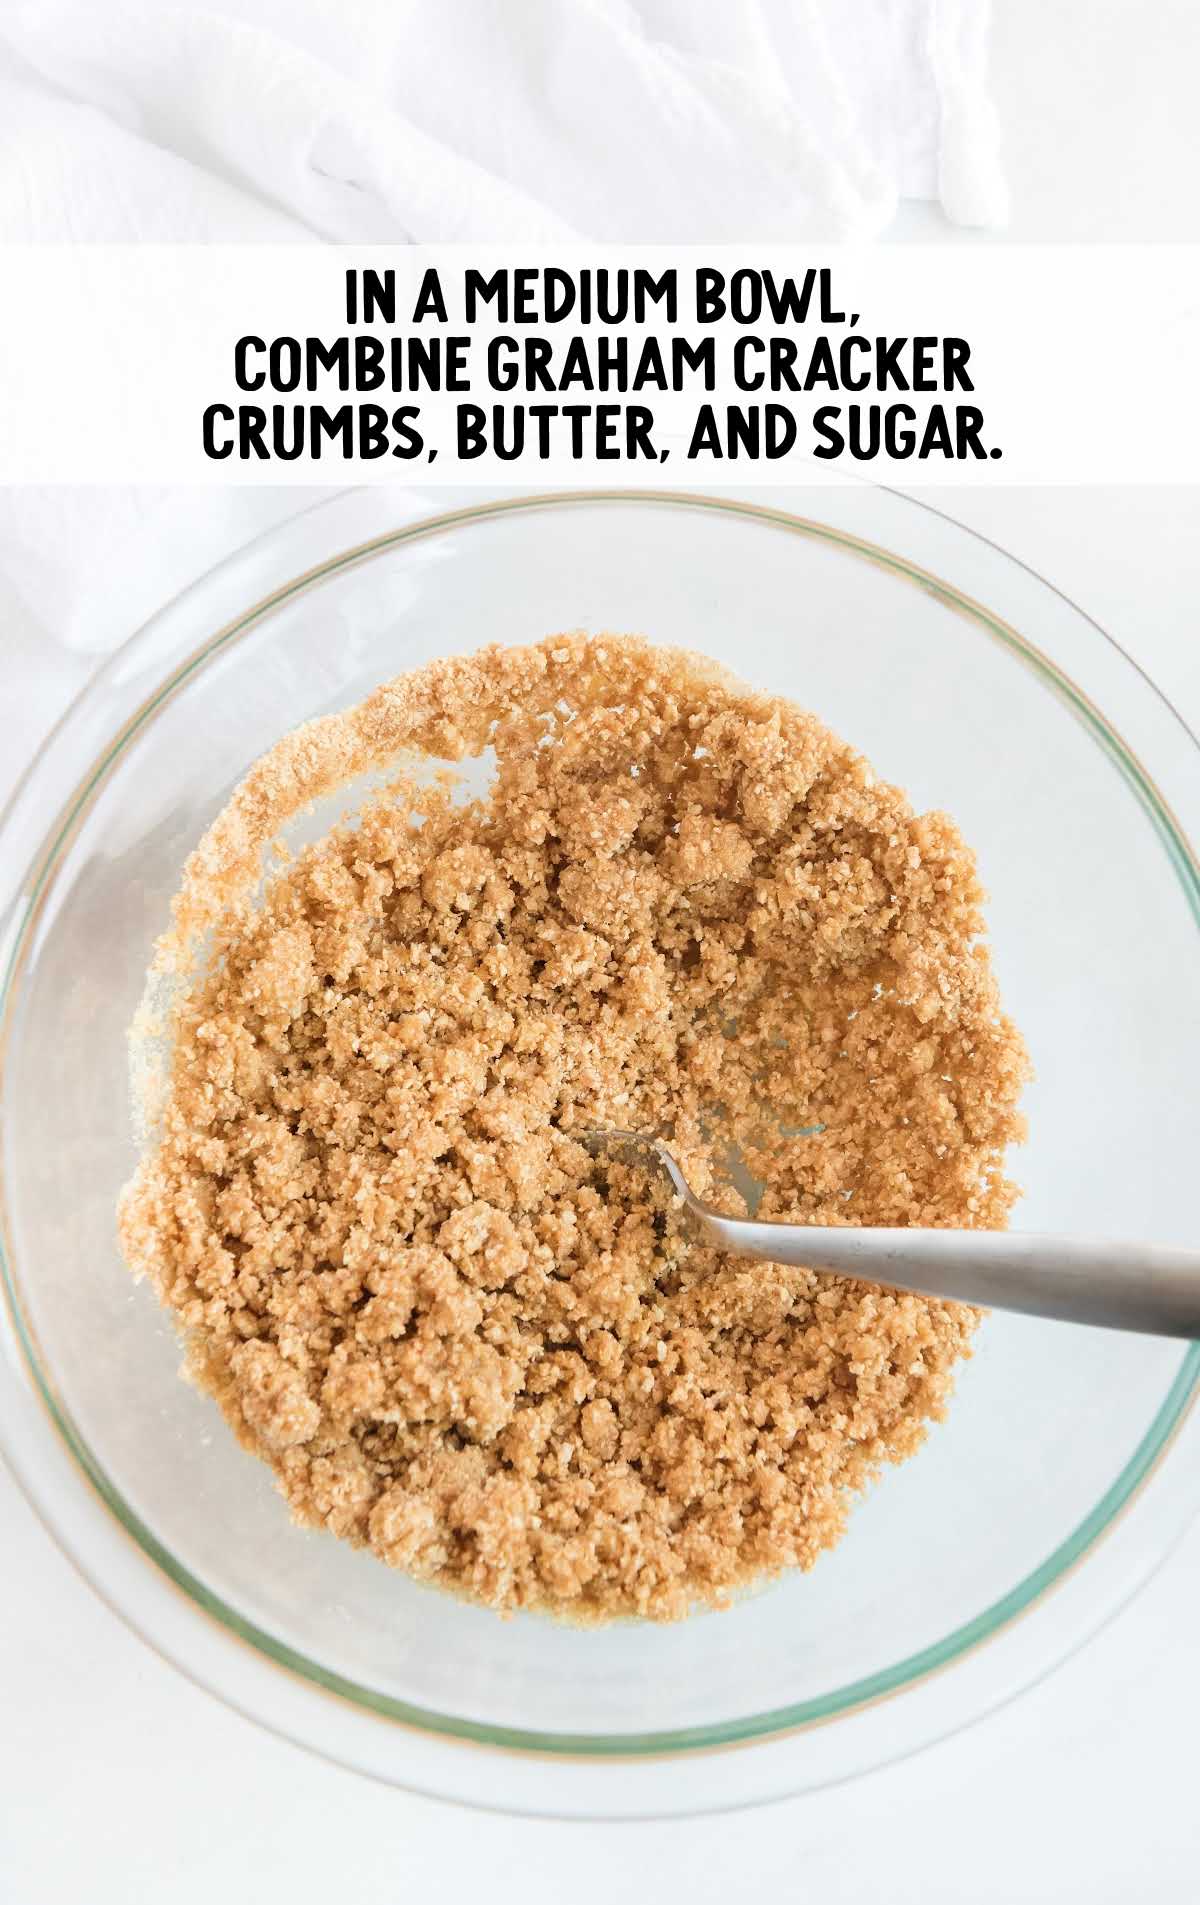 graham crackers crumbs, butter and sugar combined 